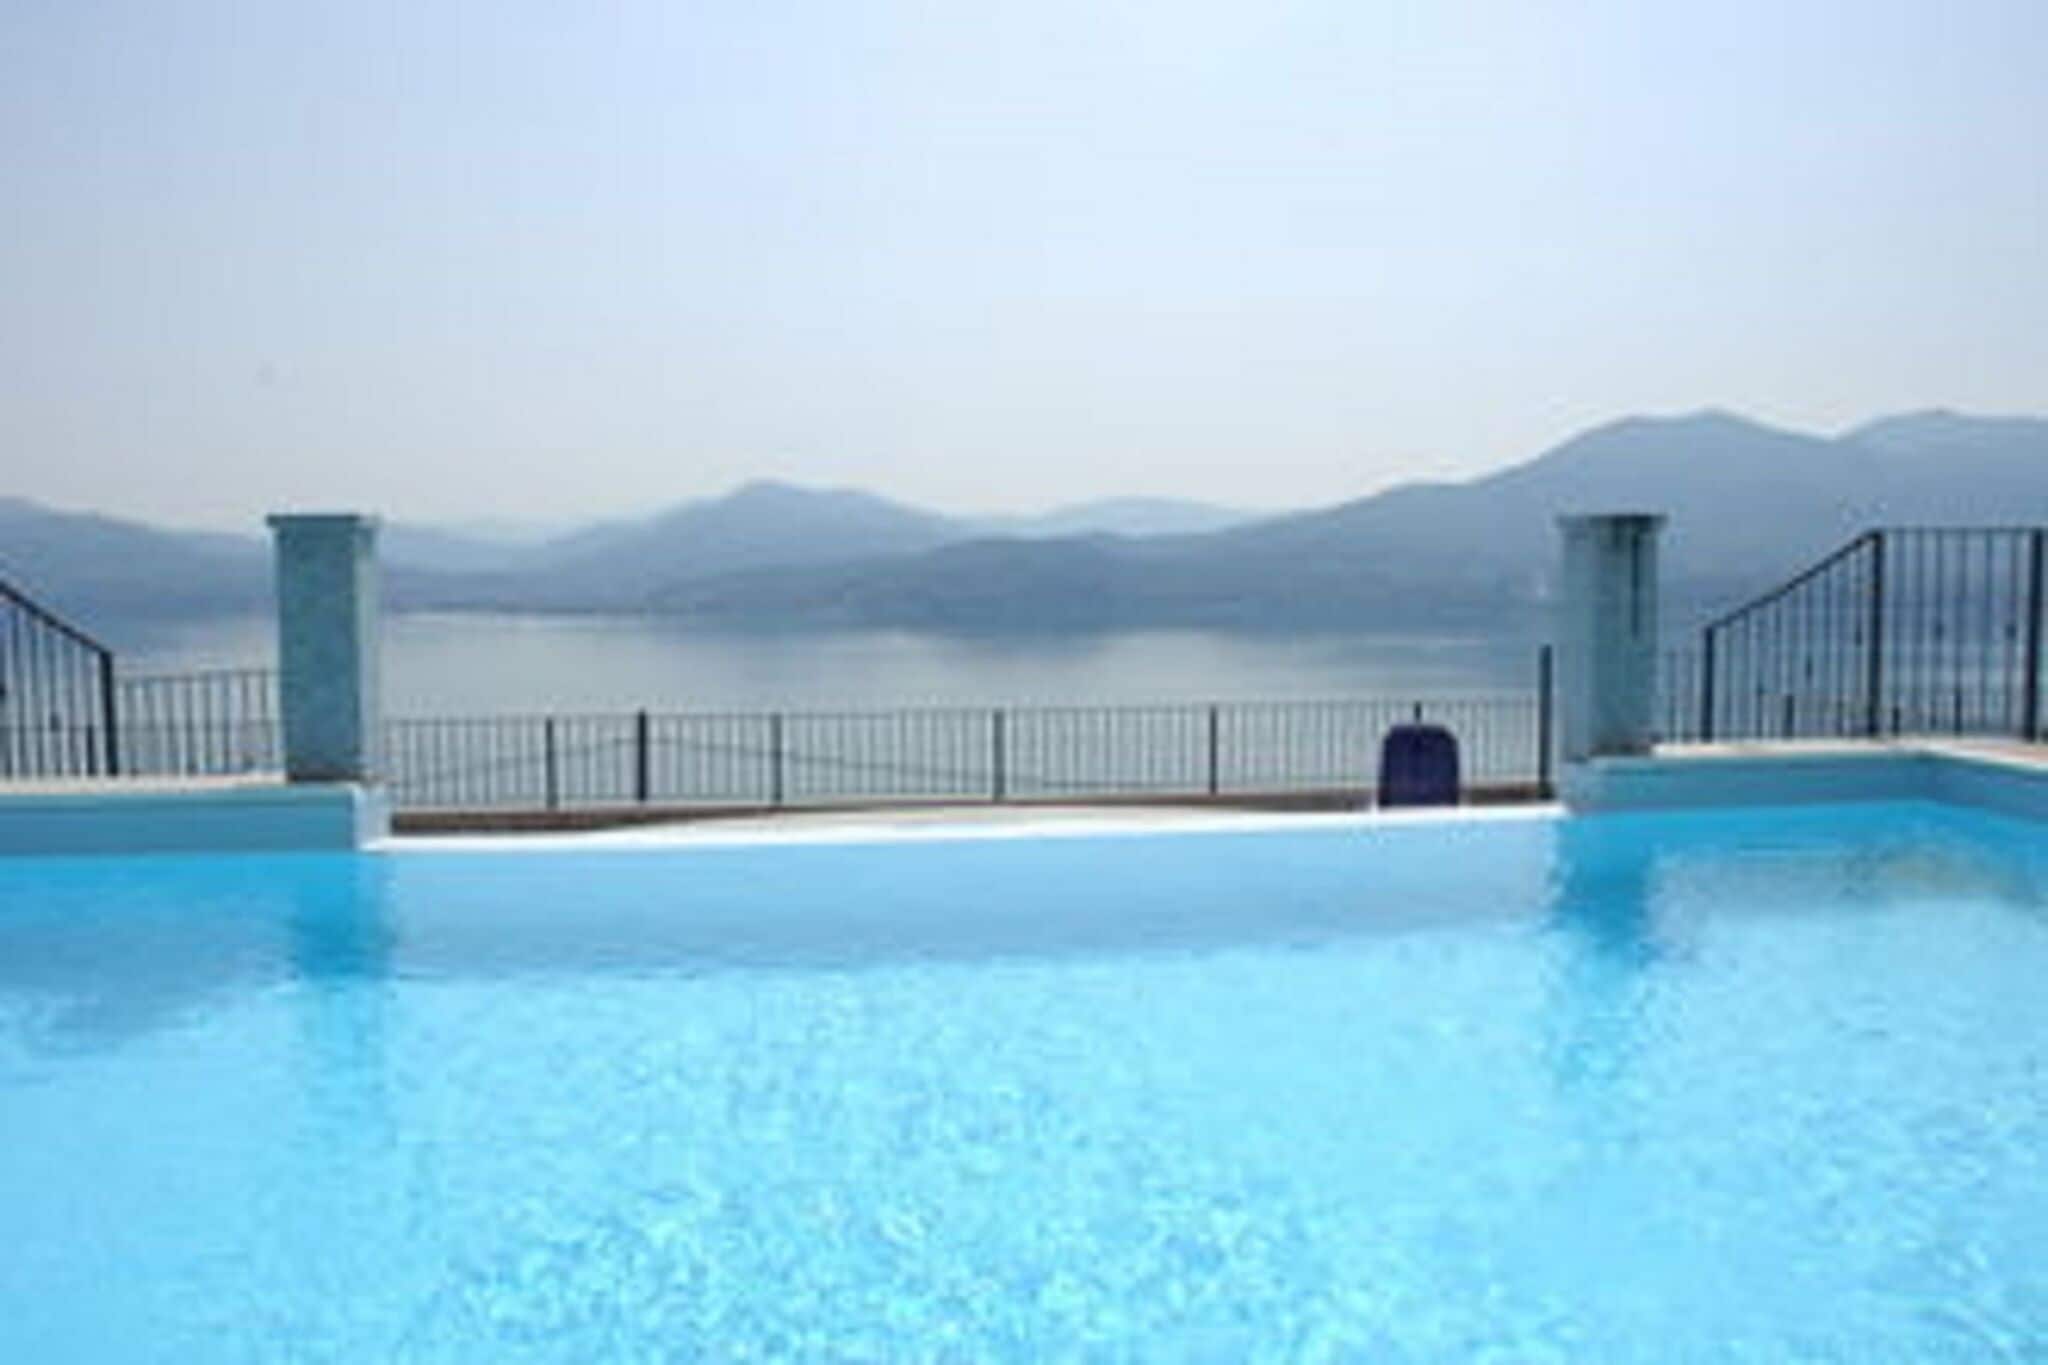 Lakeview apartment in Oggebbio with swimming pool